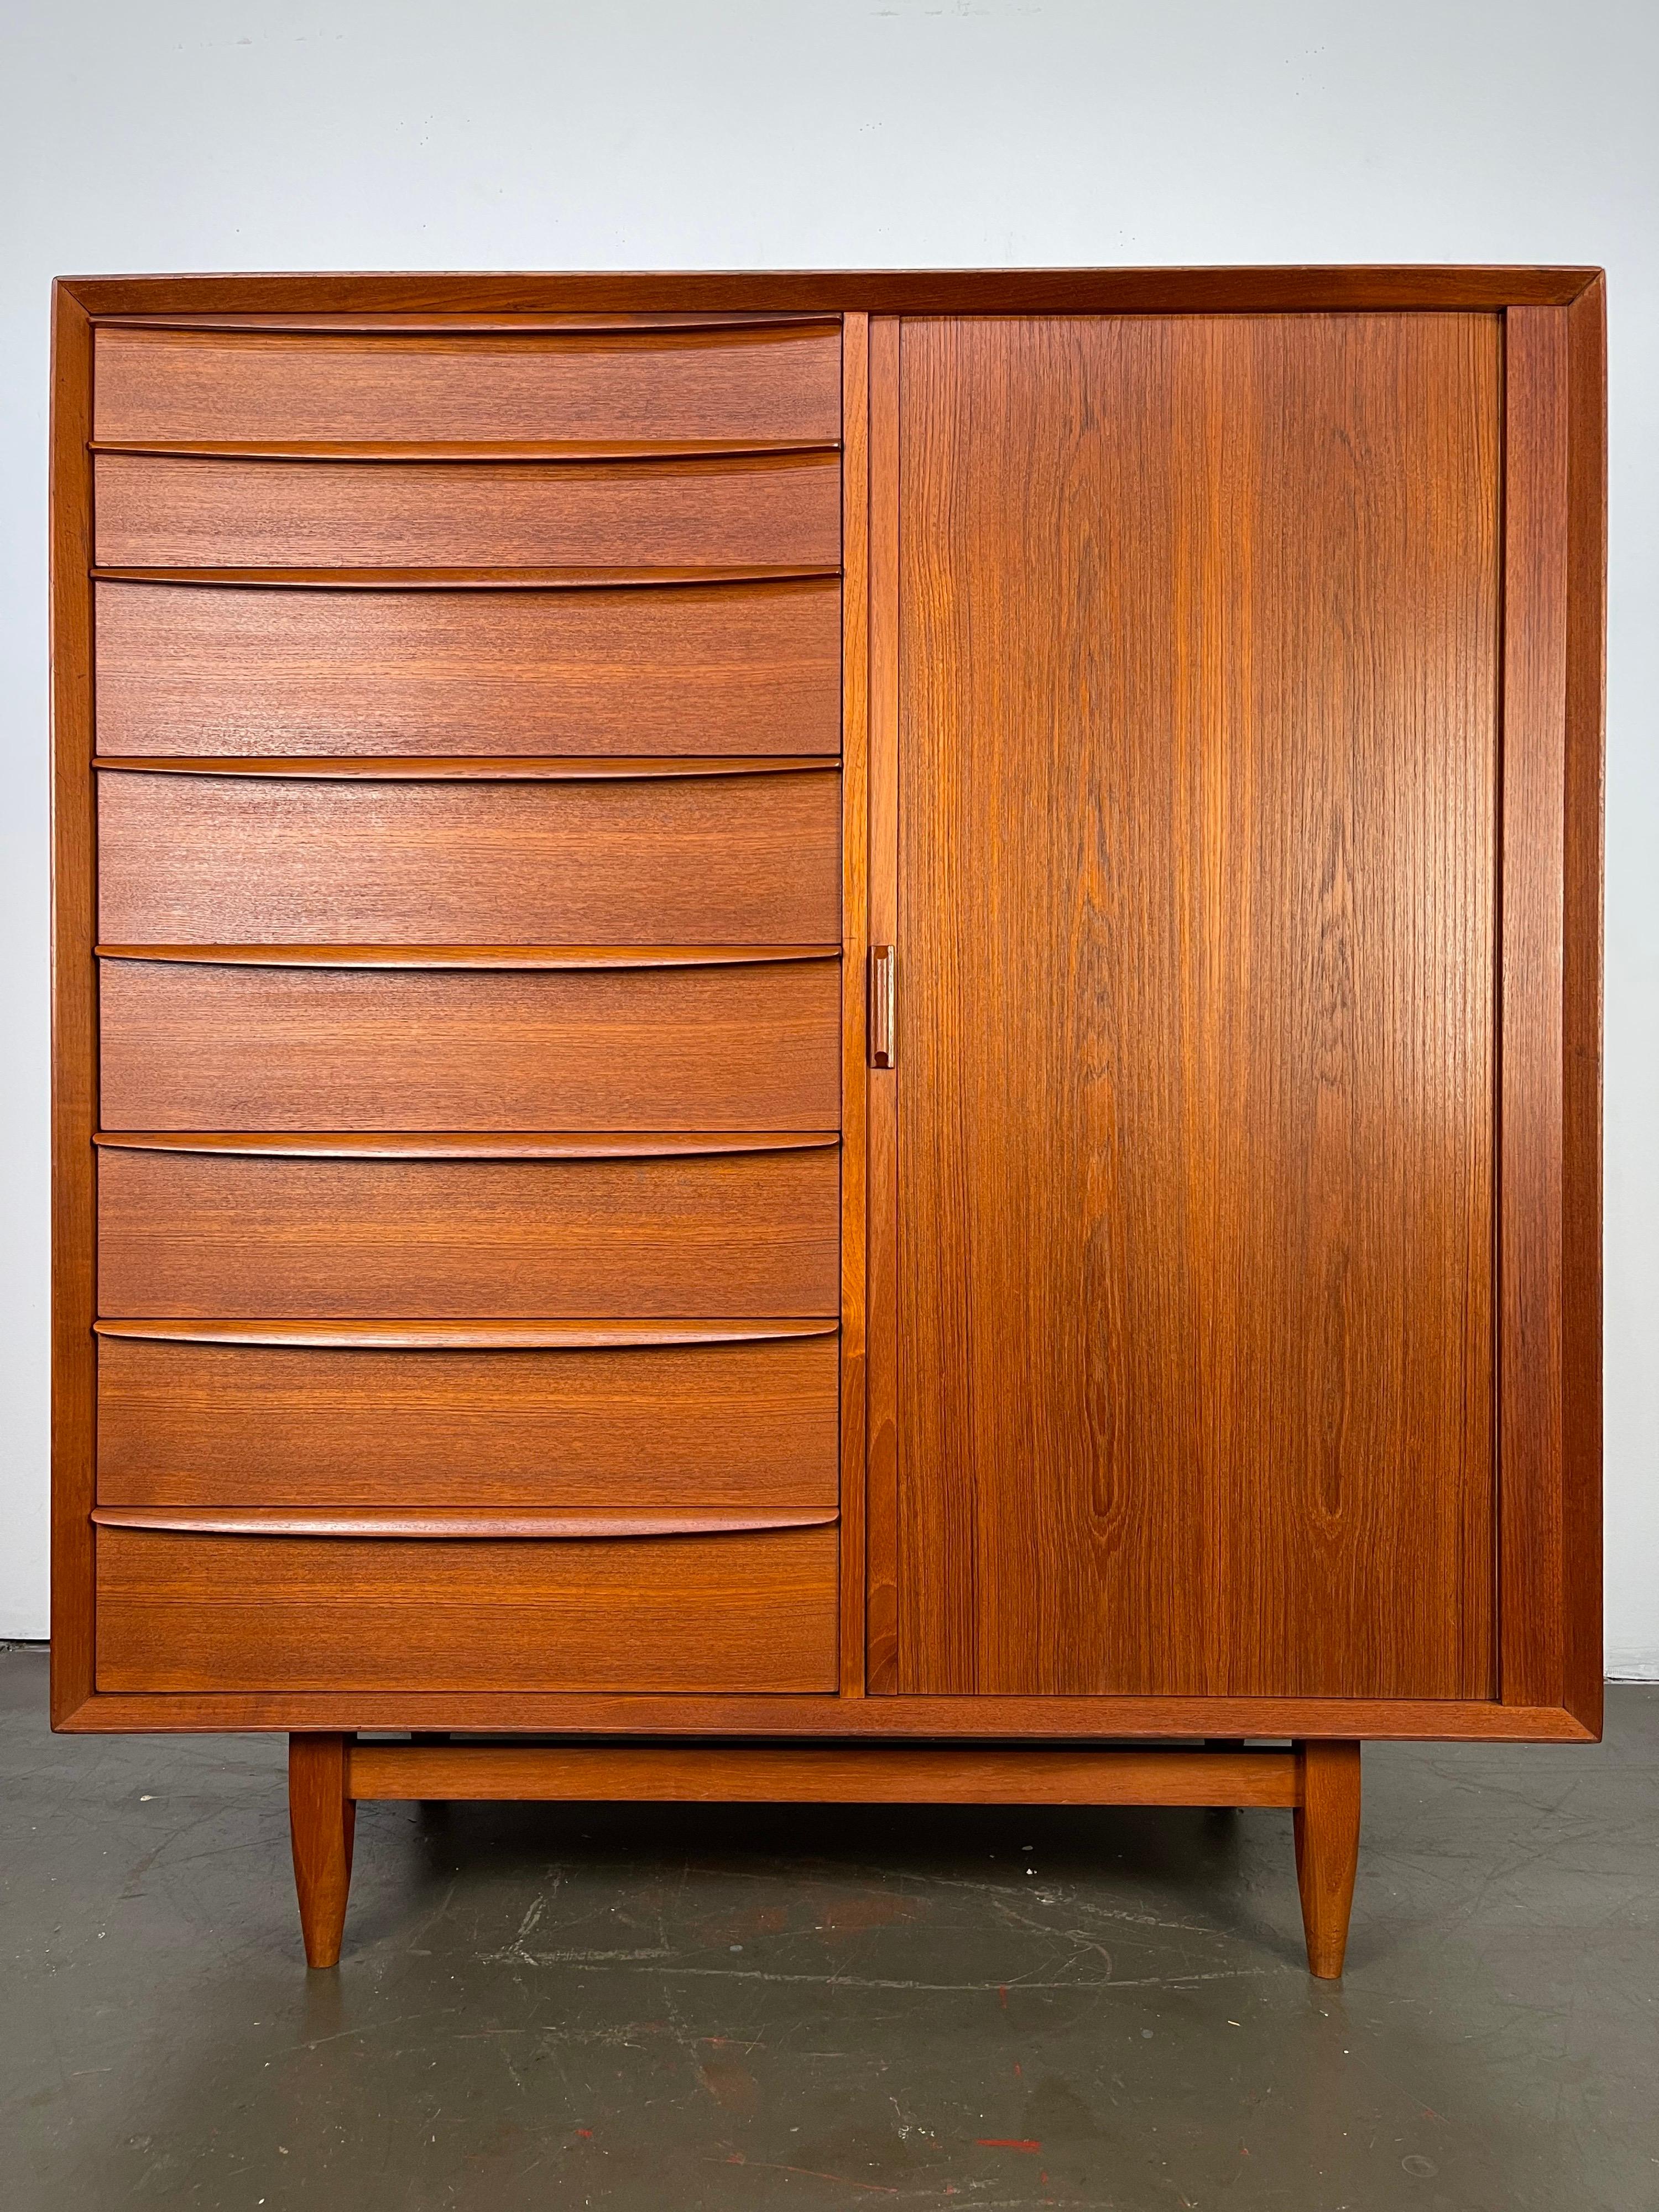 Large and very well-made Danish Modern chest of drawers by Arne Wahl Iverson for Falster, in old growth teak. They even made some of the drawer sides with rosewood which, given the rarity and value, is hard to believe. Beautifully designed with